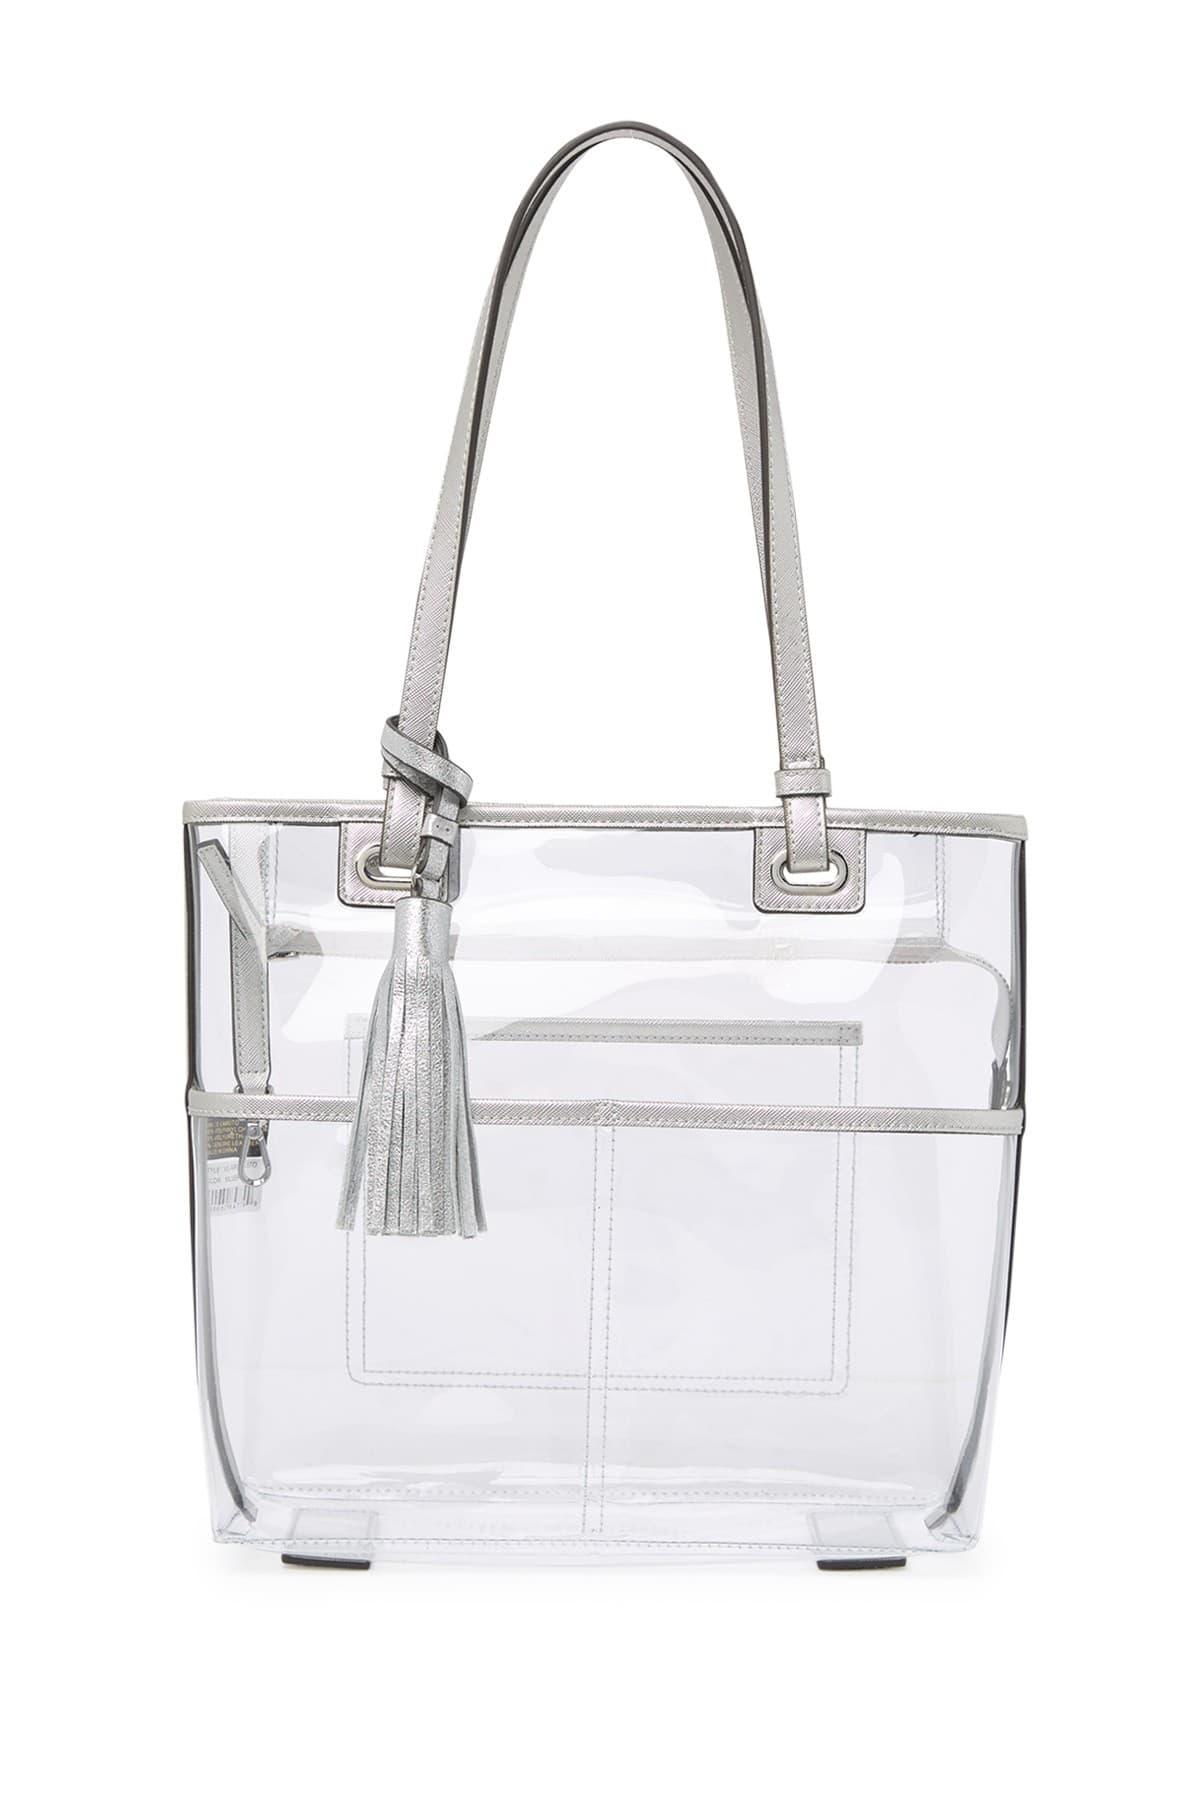 Vince Camuto Aryna Clear Small Colorblock Tote Bag in Metallic